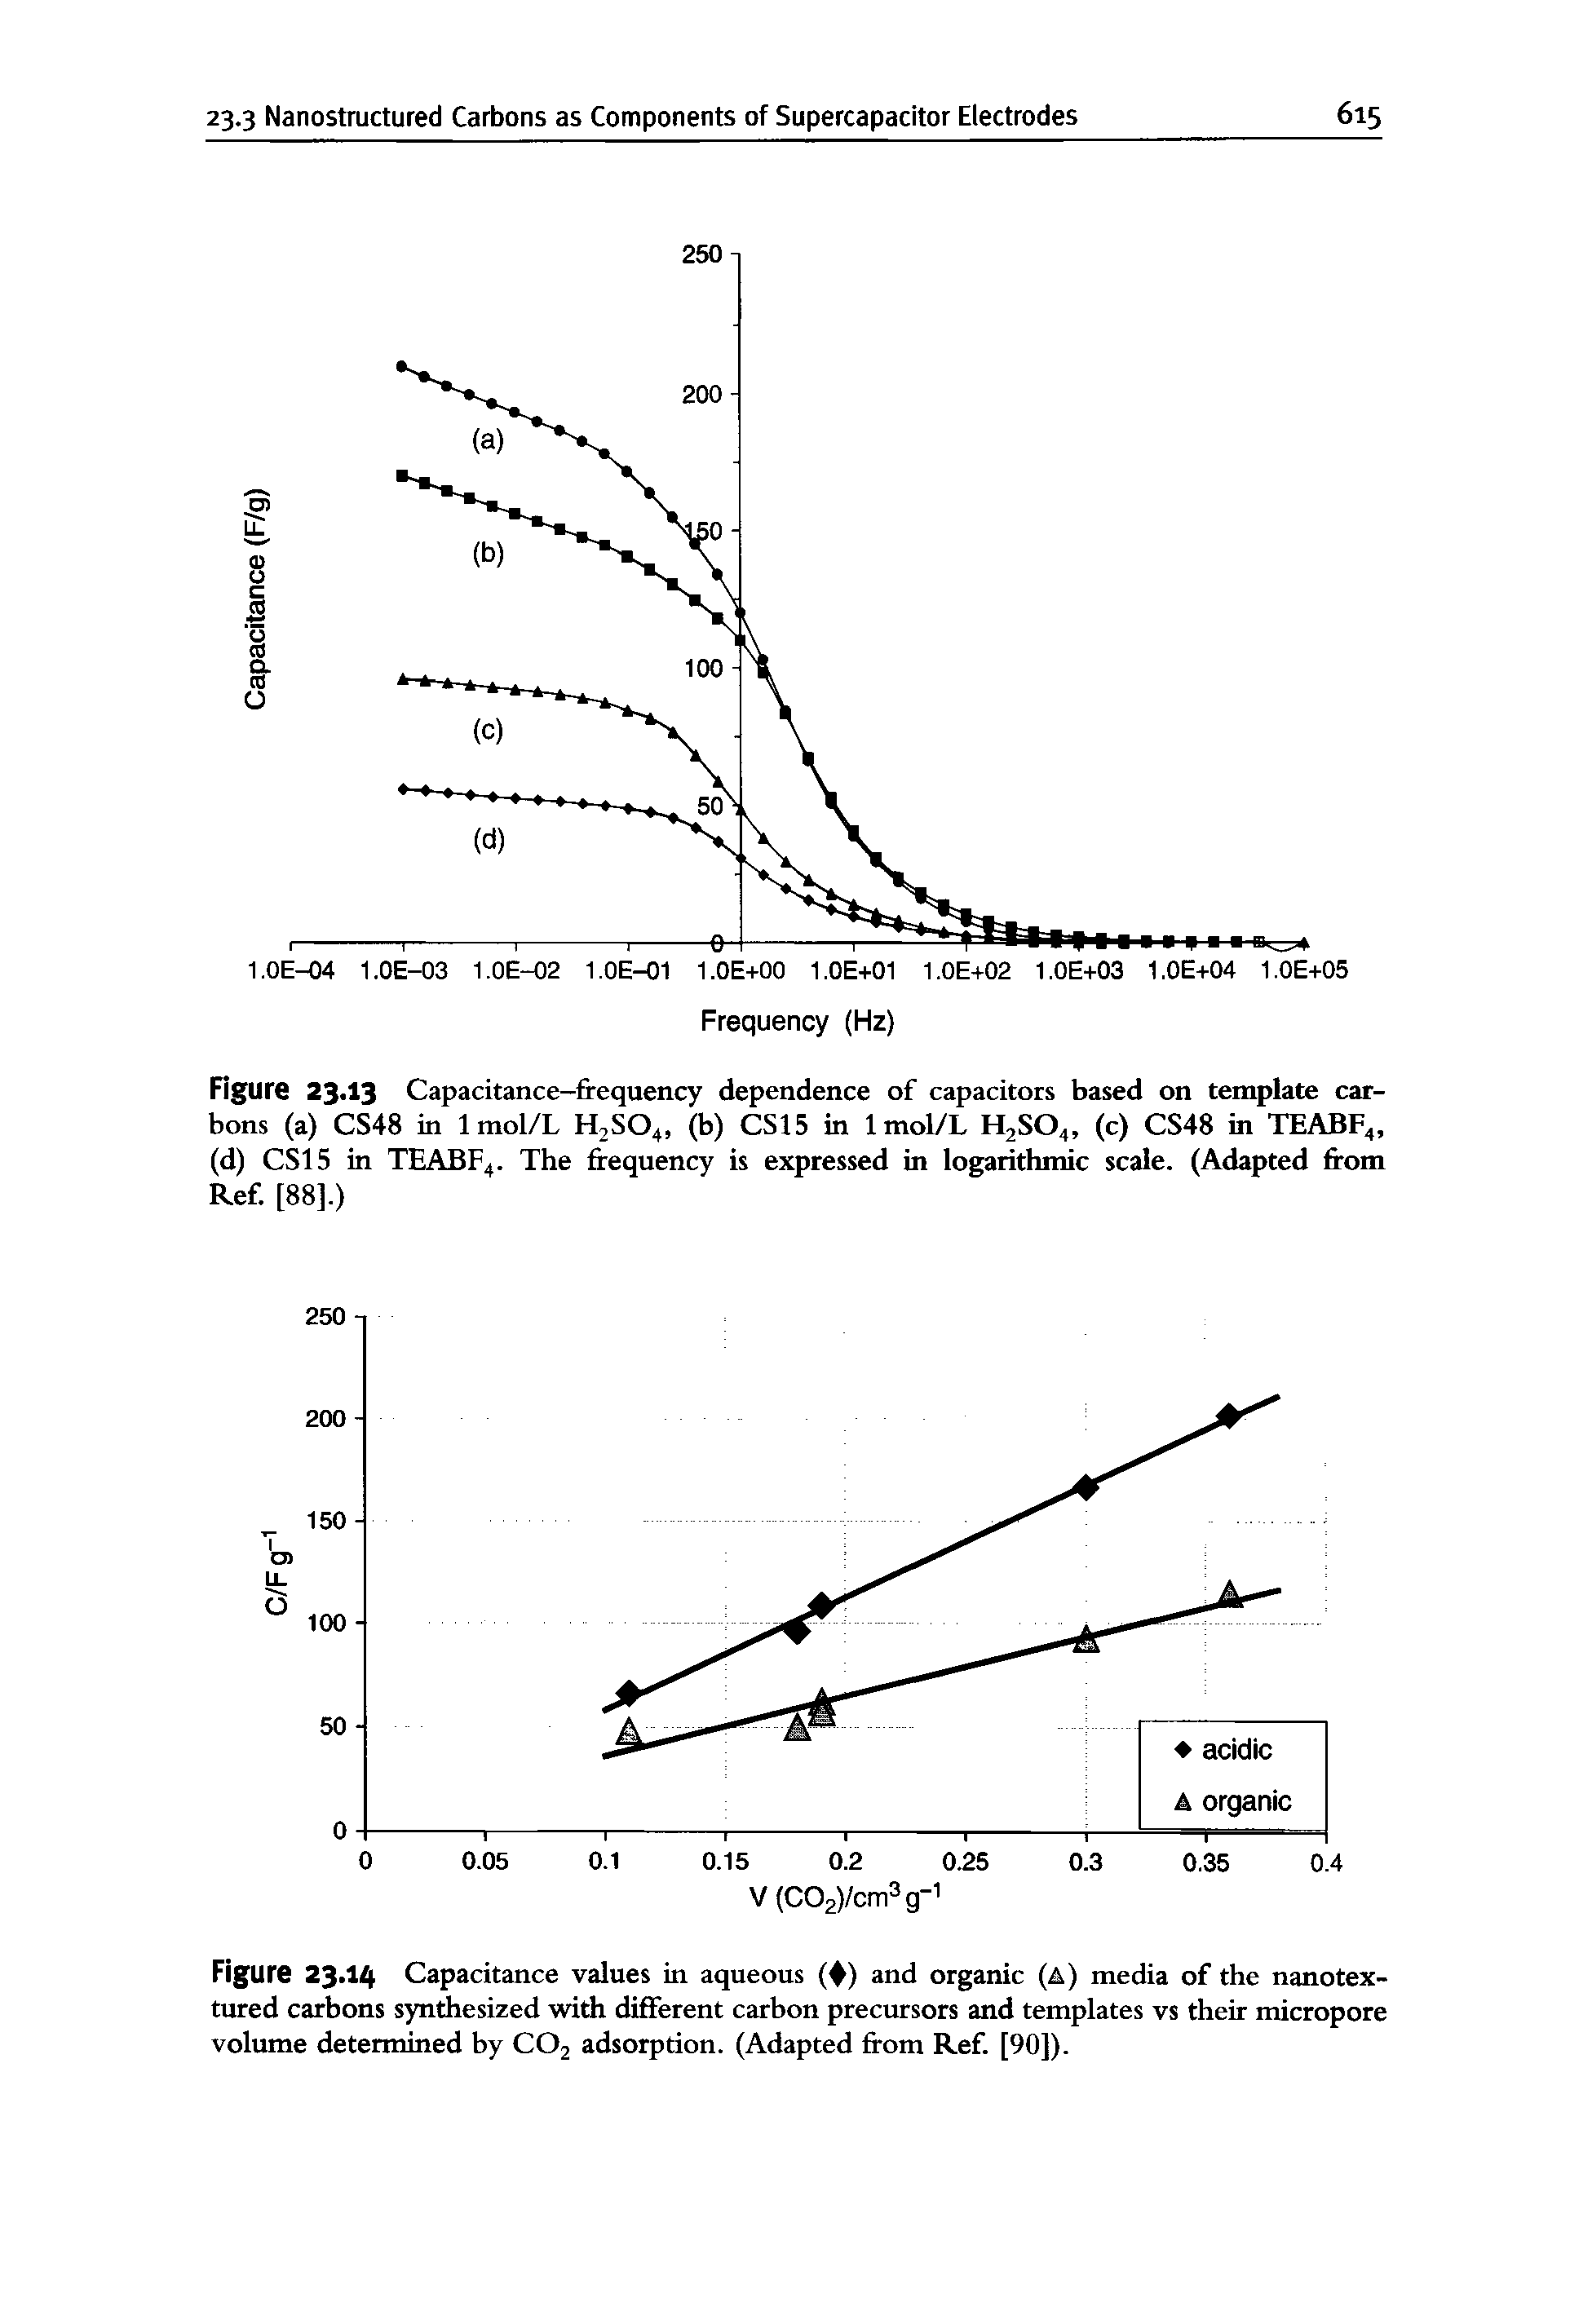 Figure 23.14 Capacitance values in aqueous ( ) and organic (A) media of the nanotex-tured carbons synthesized with different carbon precursors and templates vs their micropore volume determined by COj adsorption. (Adapted from Ref. [90]).